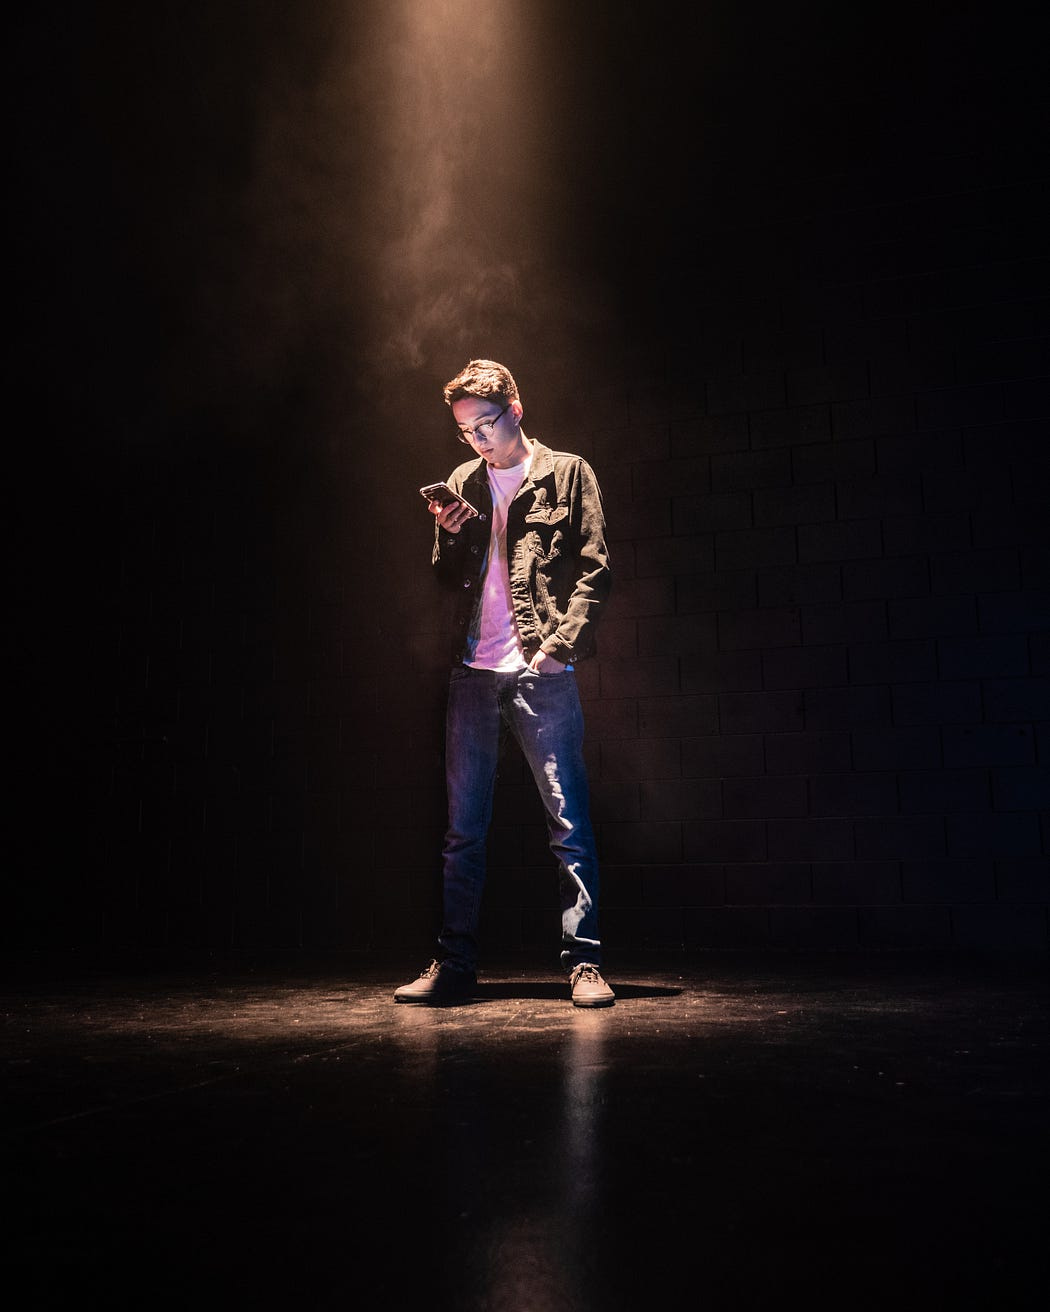 Young Asian man standing on a stage looking at his phone with a spotlight shining on him